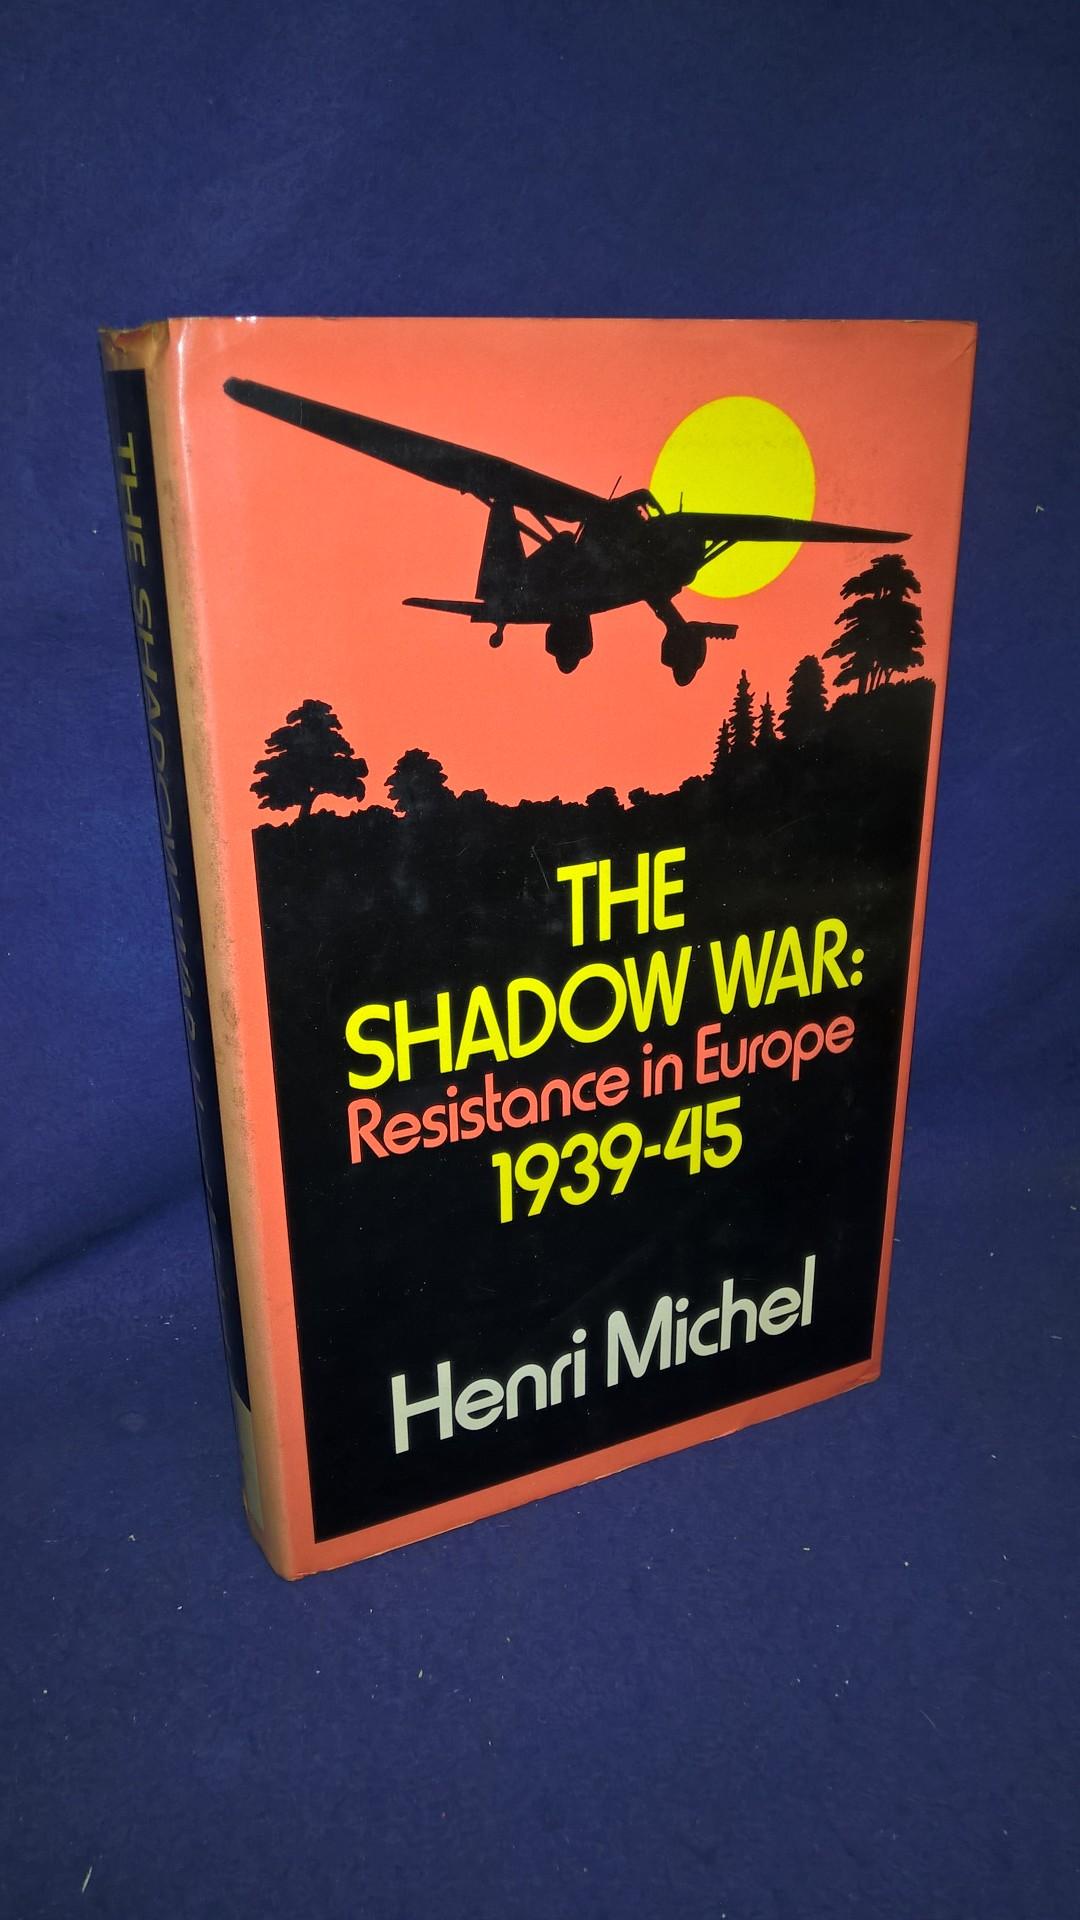 The Shadow War: Resistance in Europe 1939-45